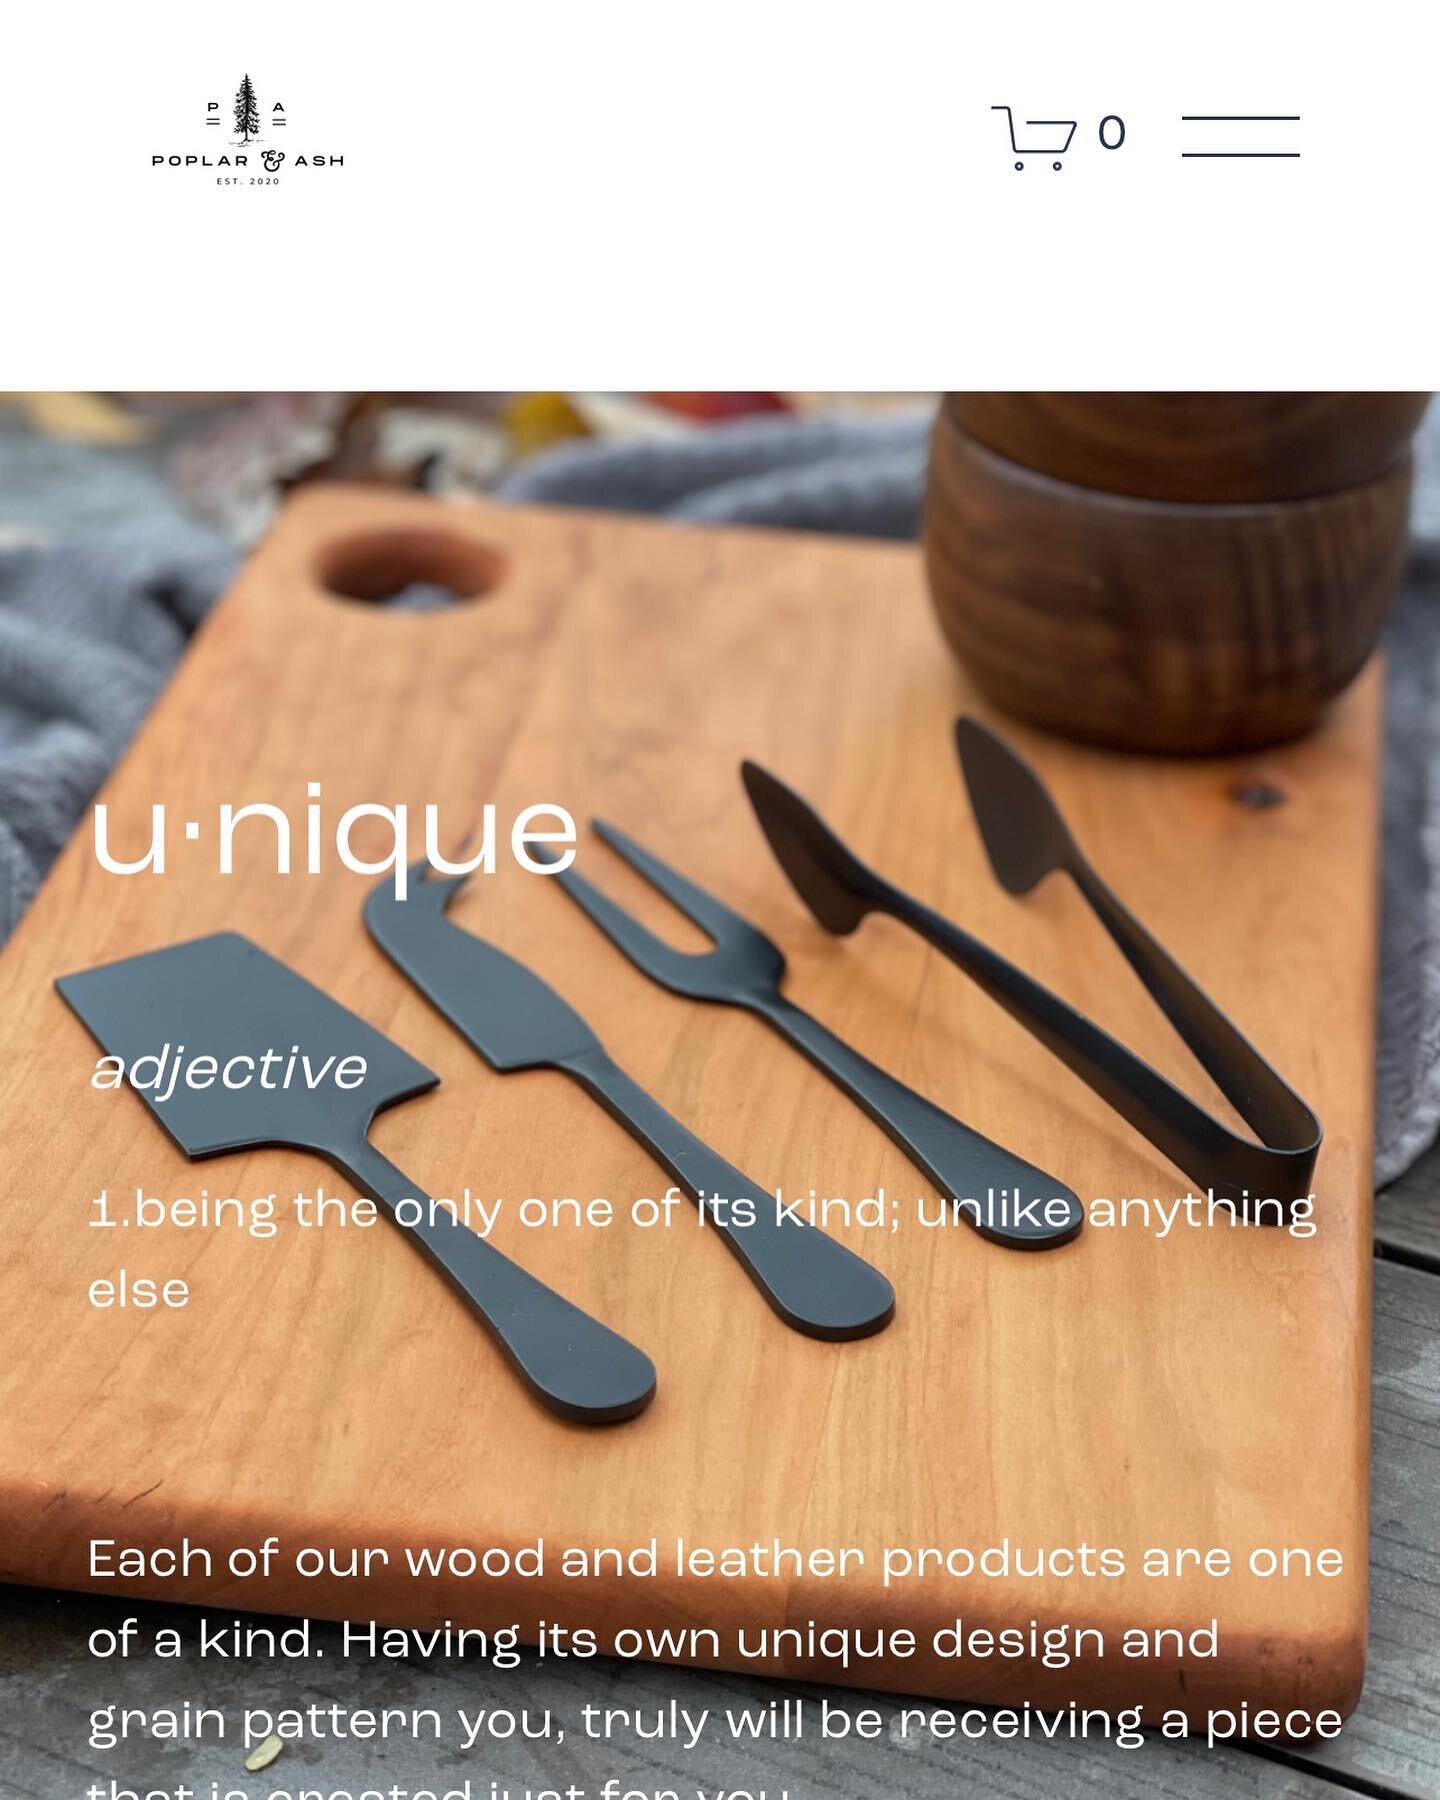 Have you seen?&hellip; We now have a fancy new website and would love for y&rsquo;all to take a look. First one to spot a spelling error will get a one of a kind poplar and ash hat. Ready, set, go! 
Poplarandashdesign.com